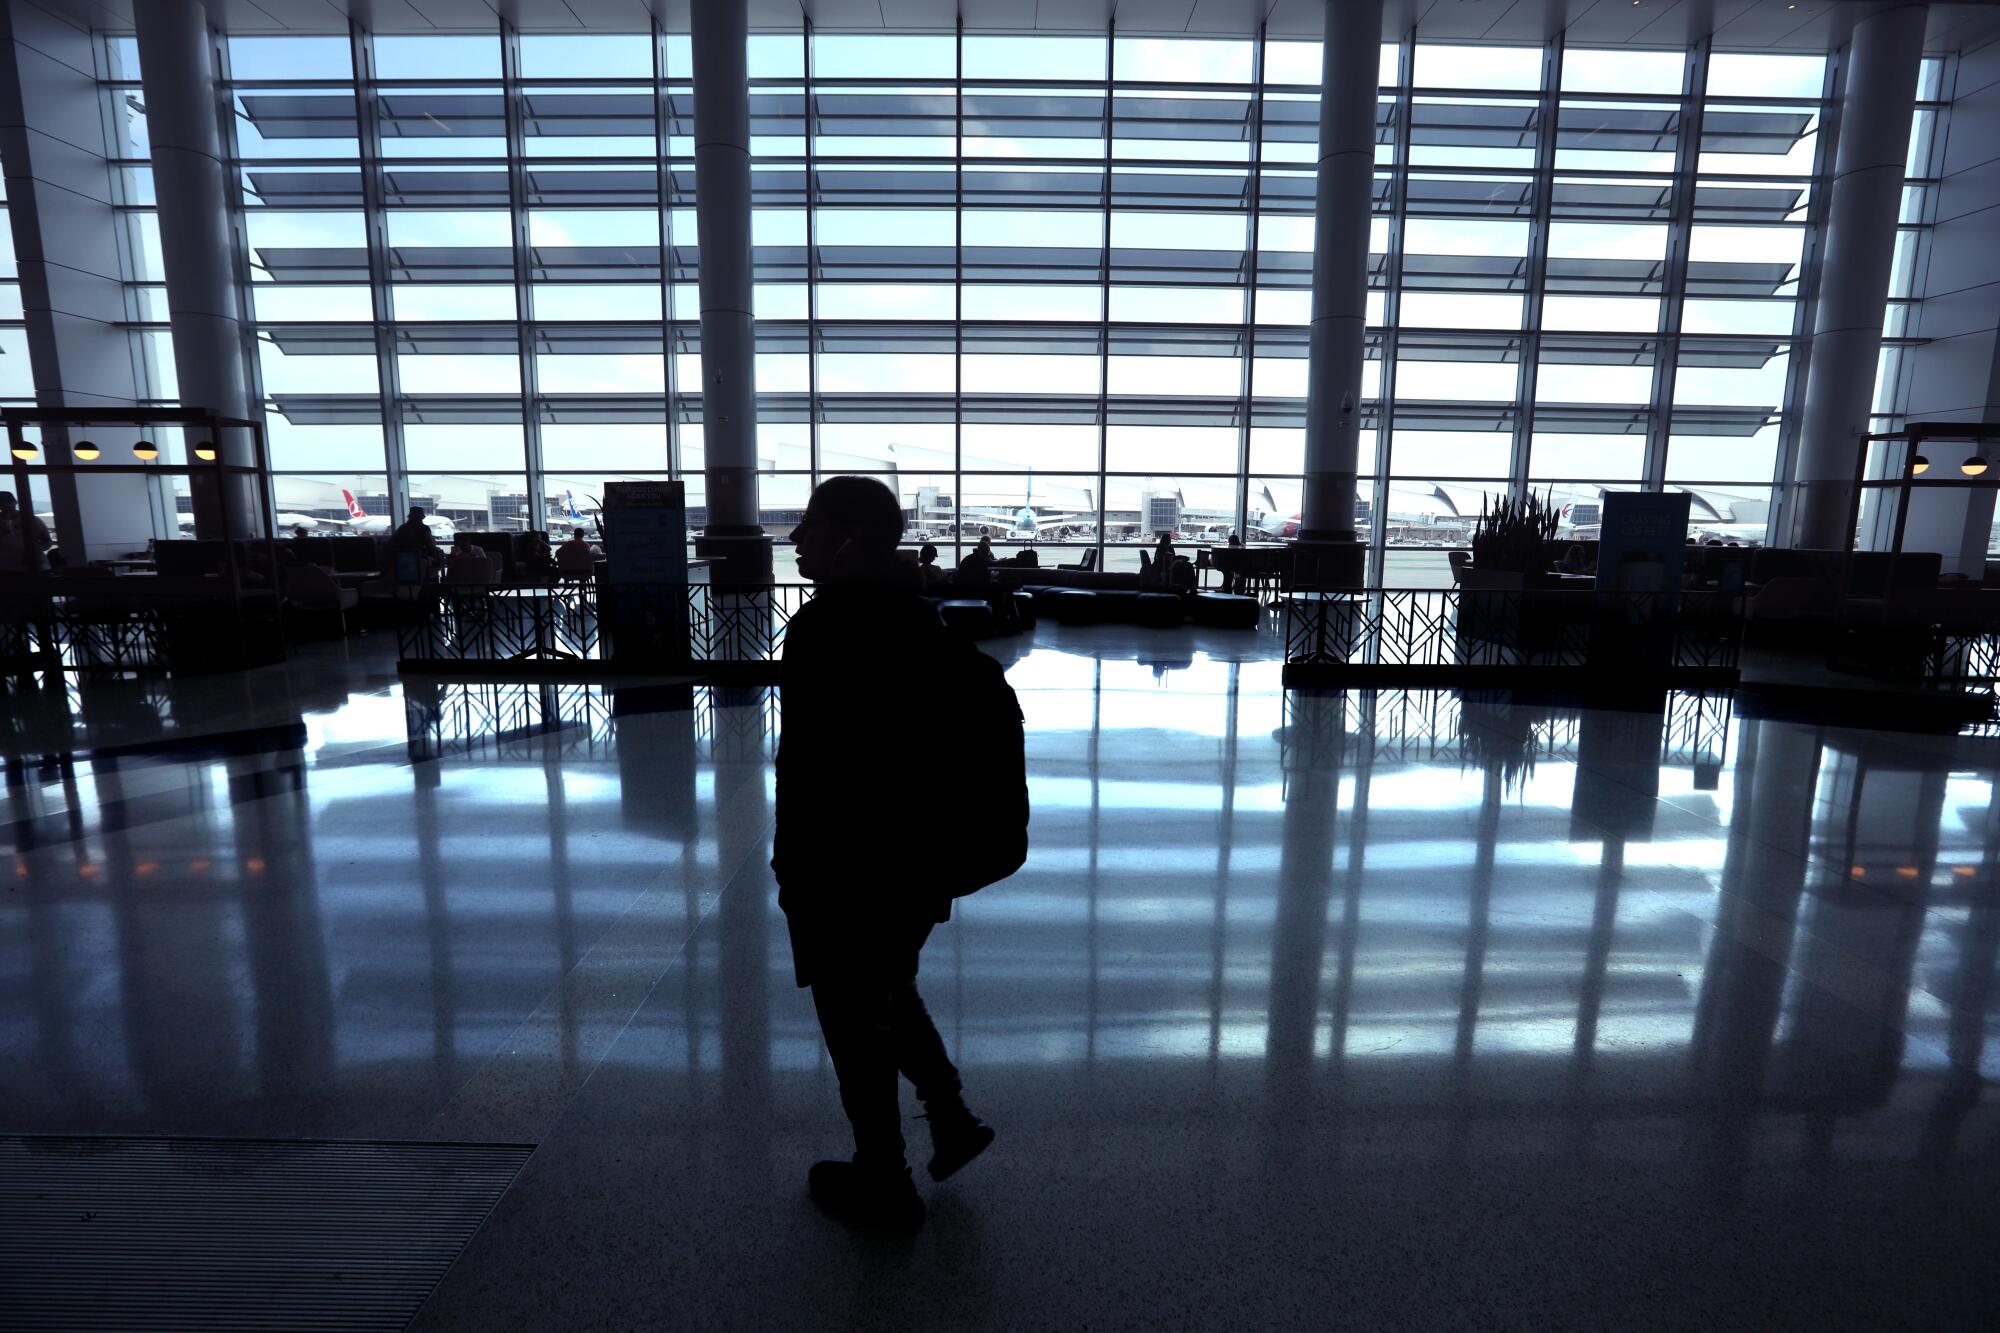 A man silhouetted inside an airport terminal